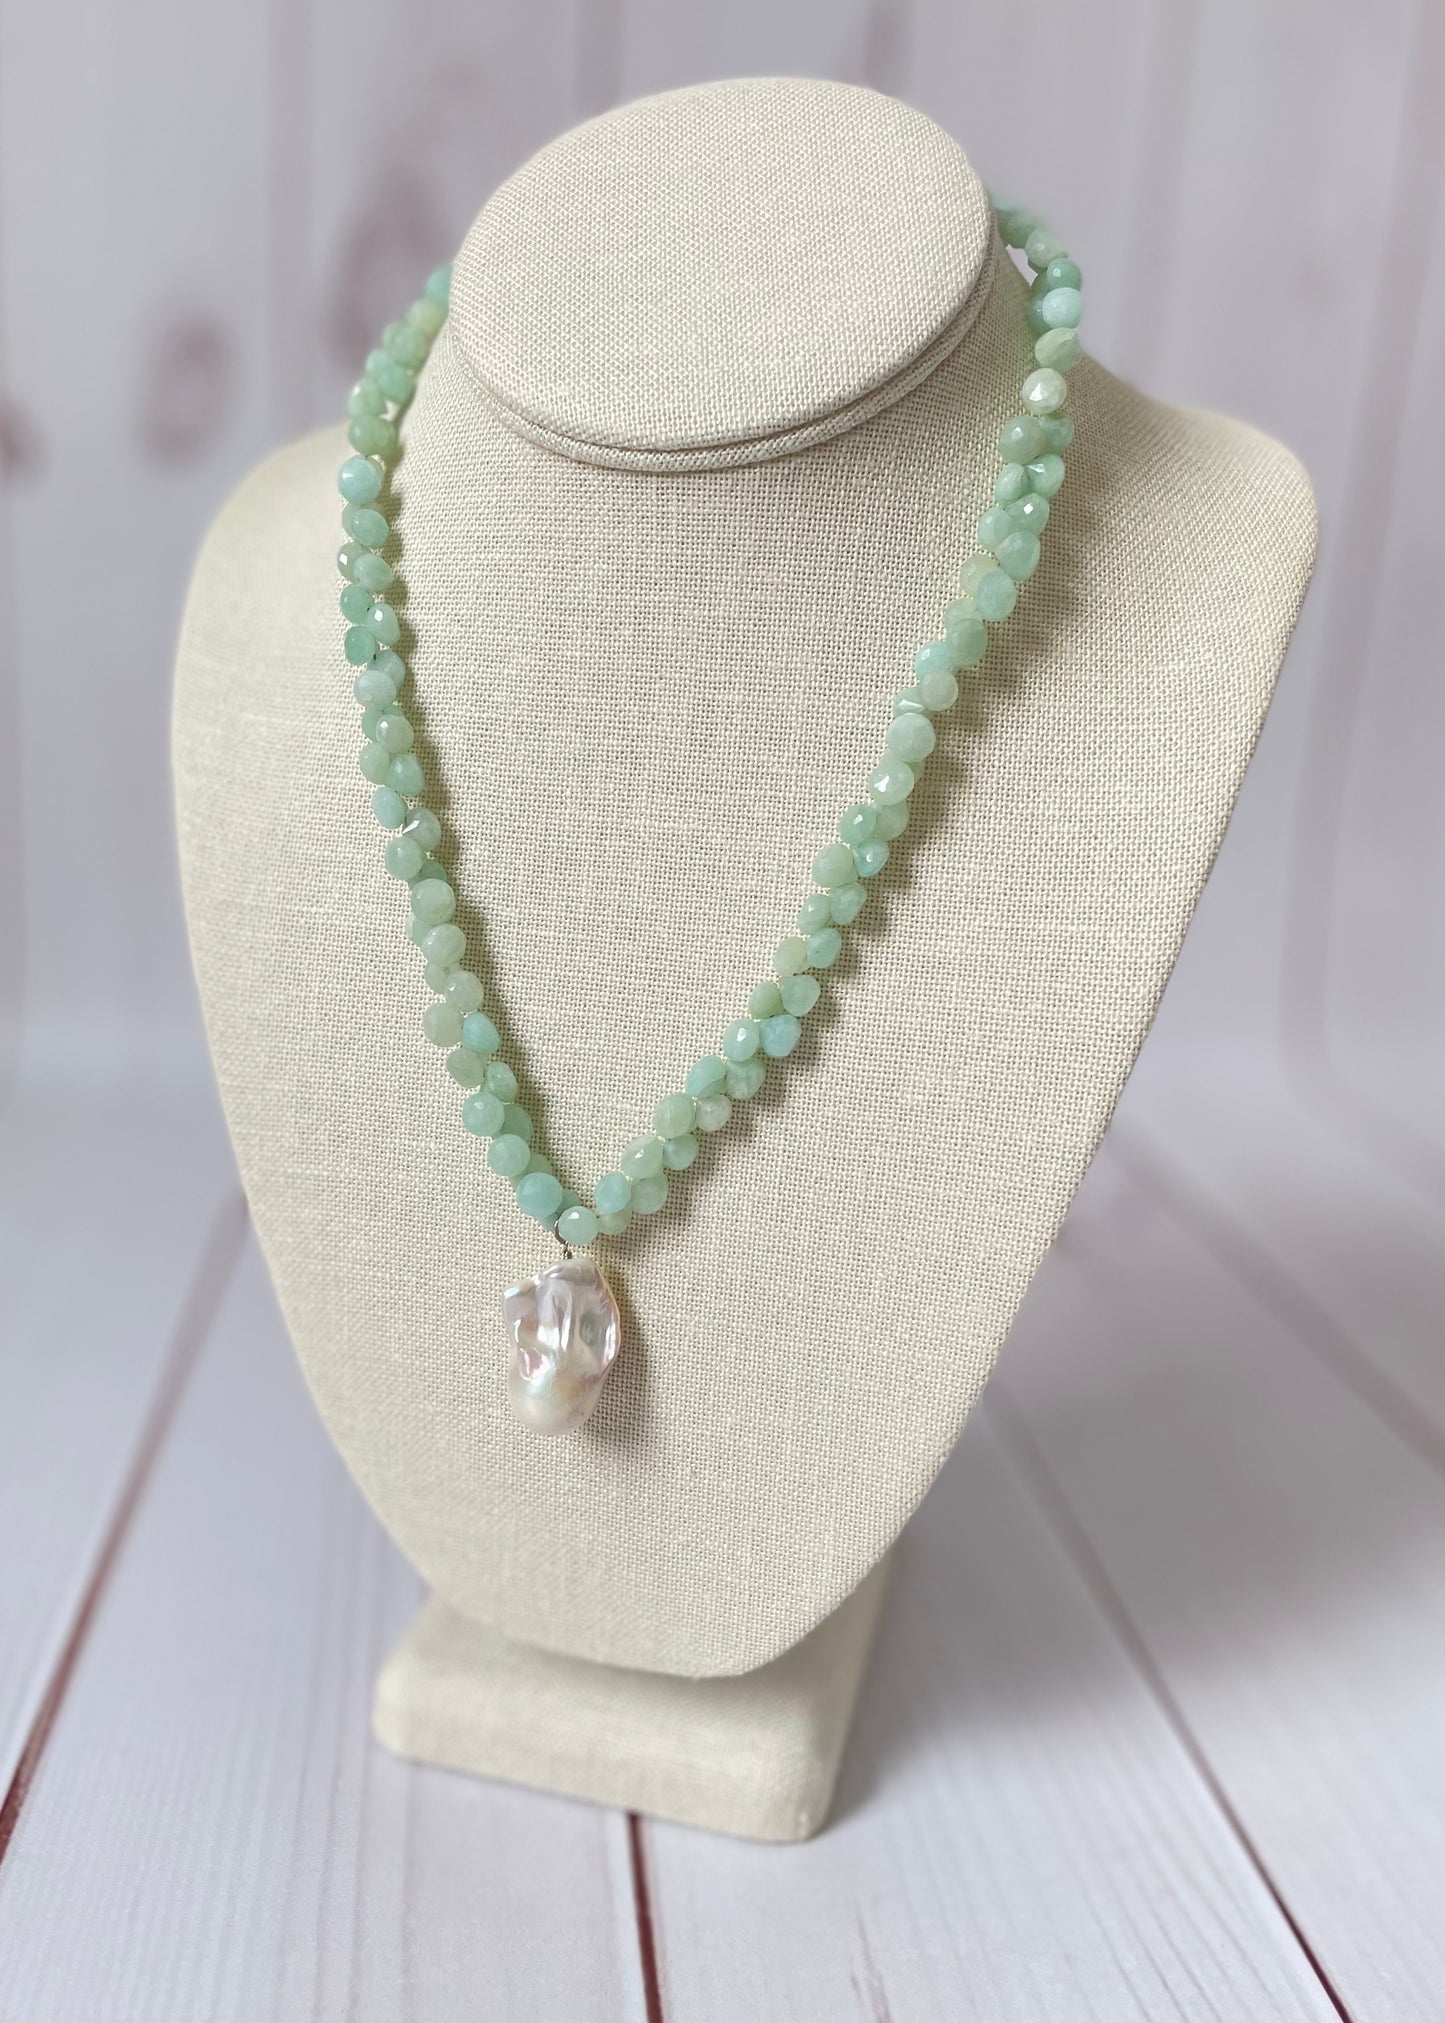 Amazonite Briolette and Large Baroque Pearl Necklace